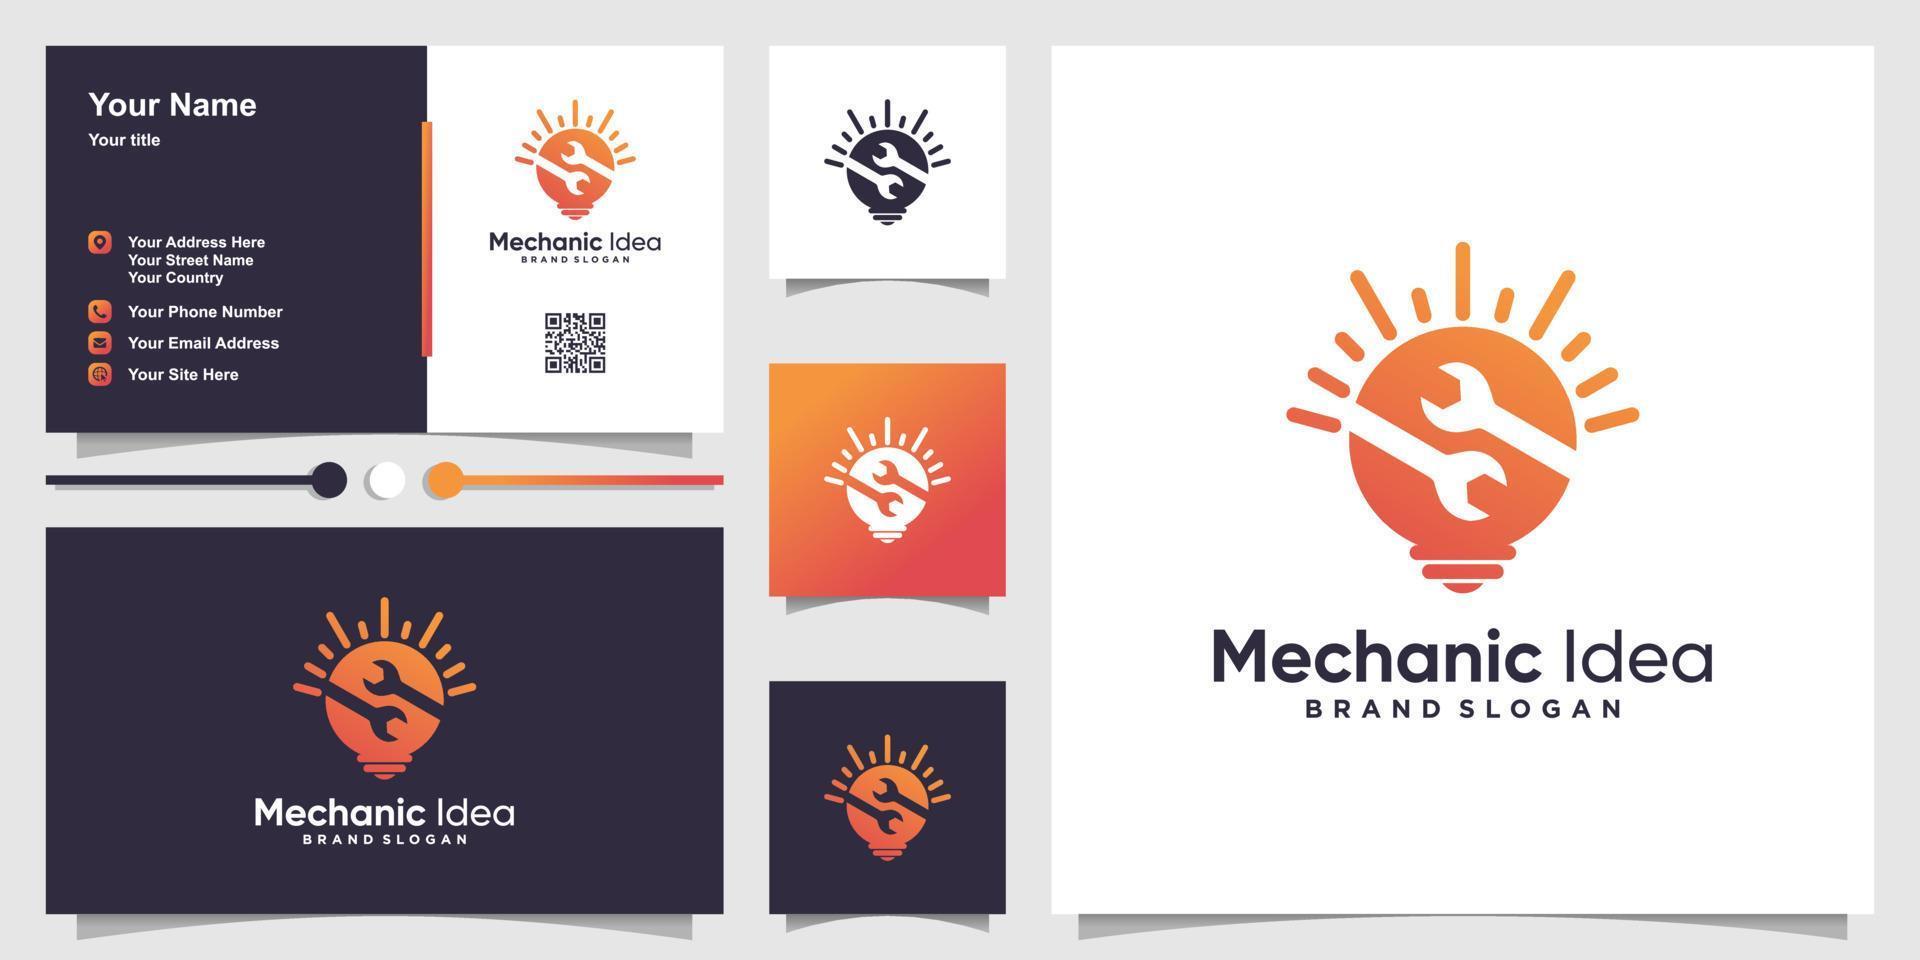 Mechanic idea logo part 2, with modern creative concept and business card design template Premium Vector